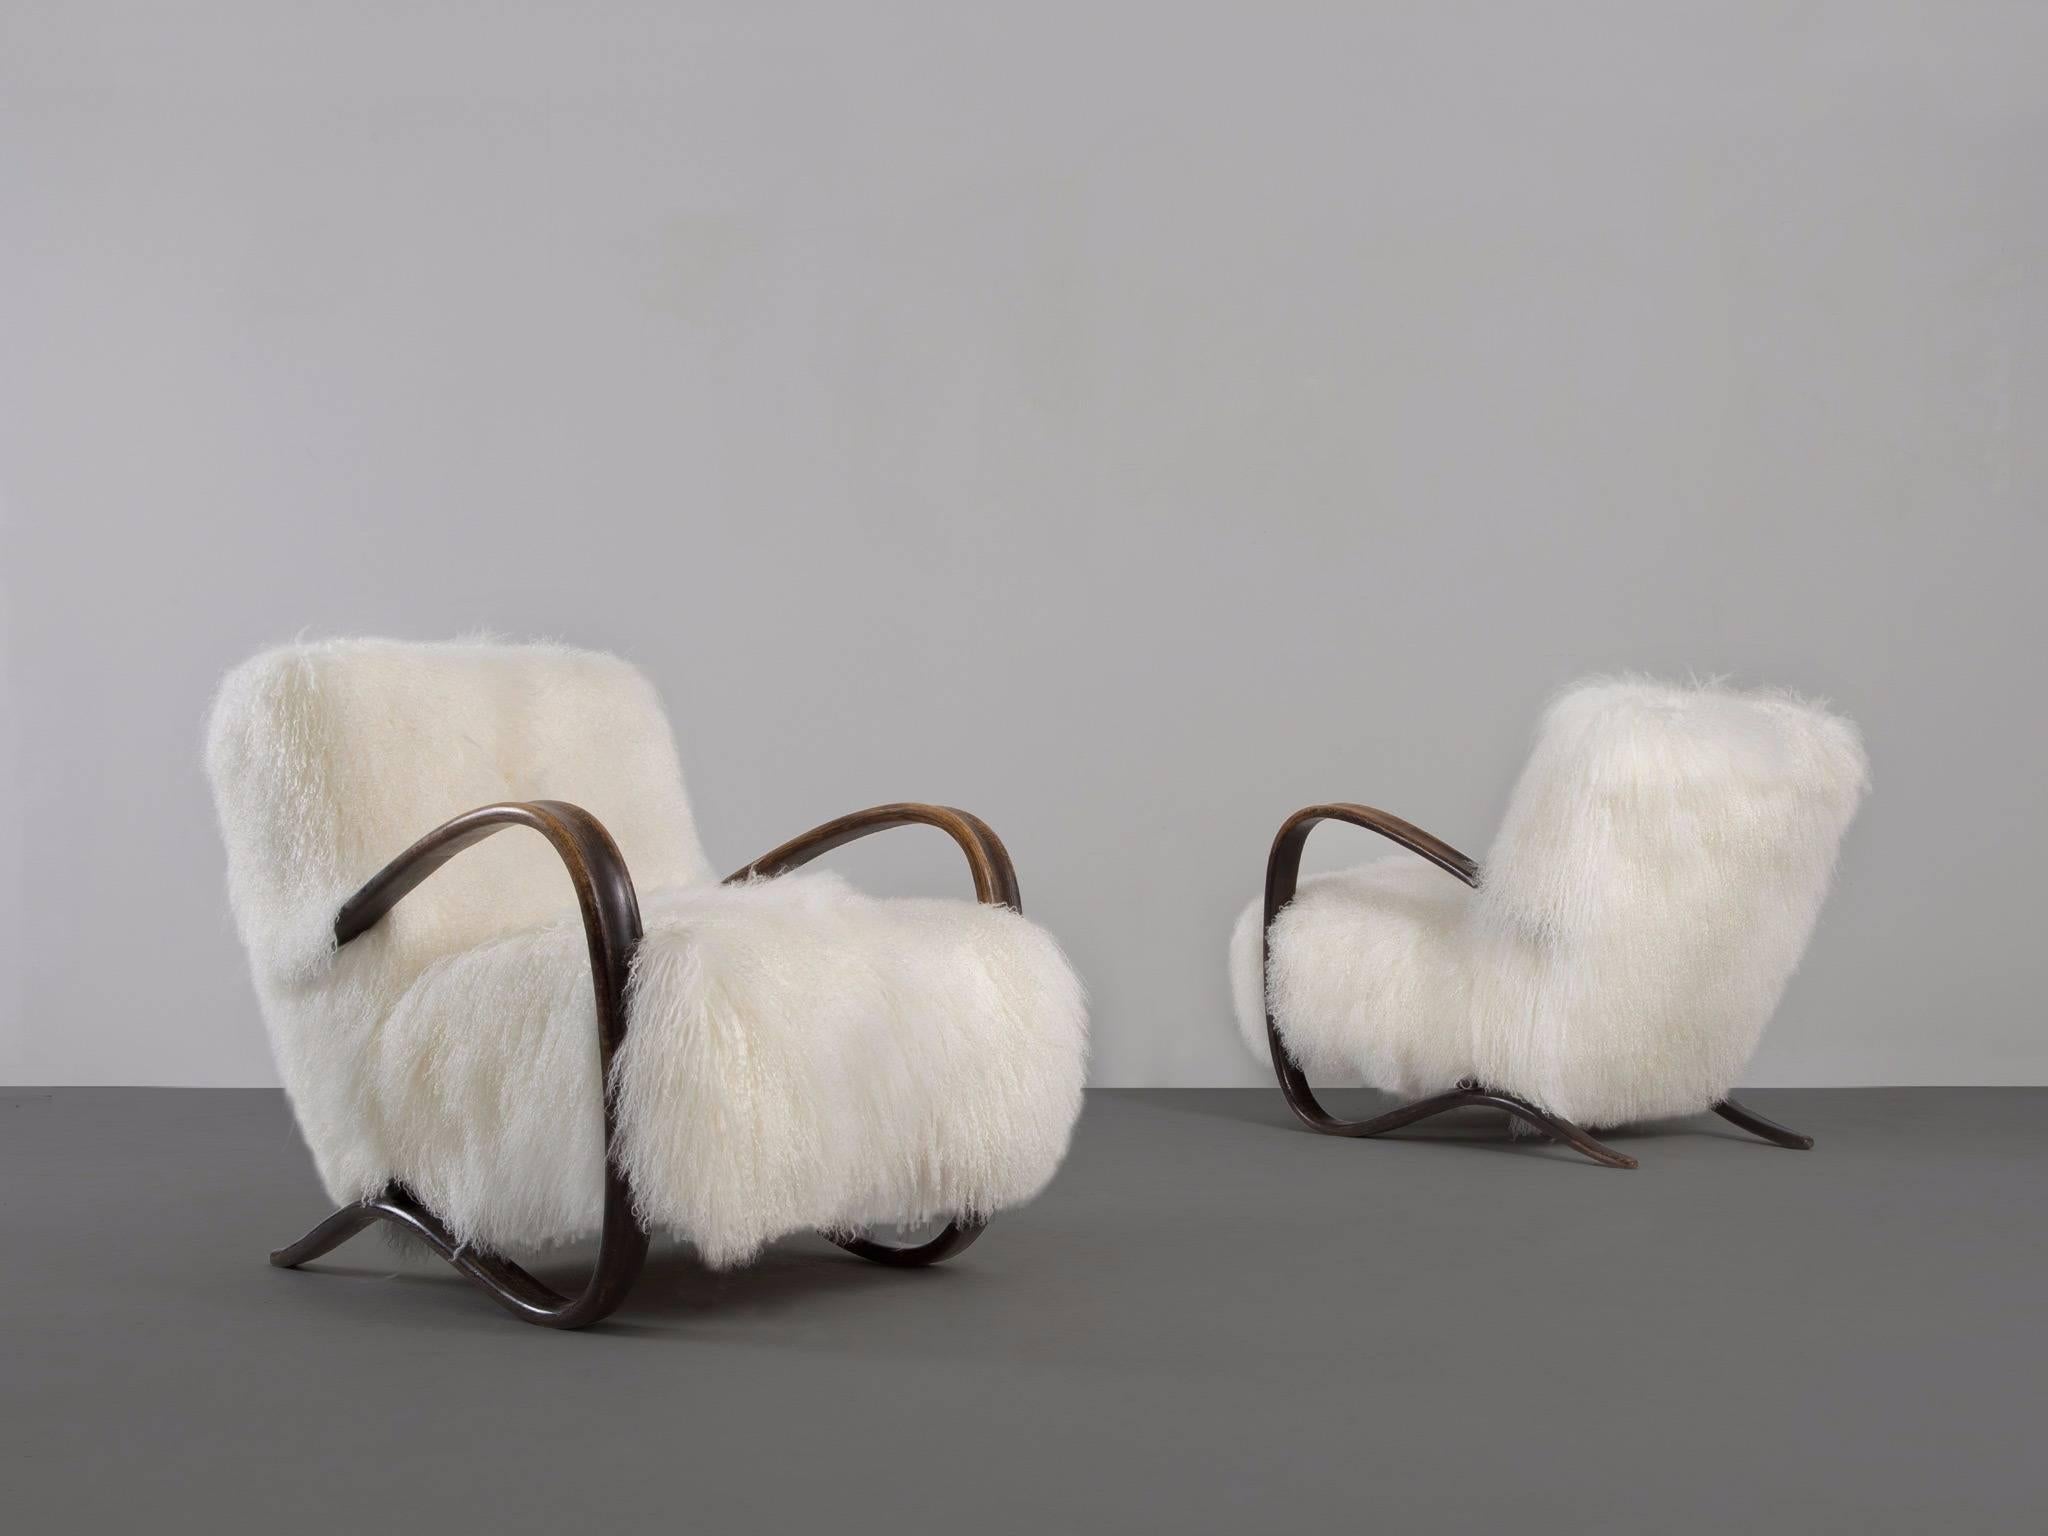 Jindrich Halabala, lounge chairs, in stained beech and sheepskin, Czech Republic, 1930s. 

Extra ordinary pair of white easy chairs with Tibetan lambswool upholstery. These chairs have a very dynamic and abundant appearance. This fuzzy upholstery